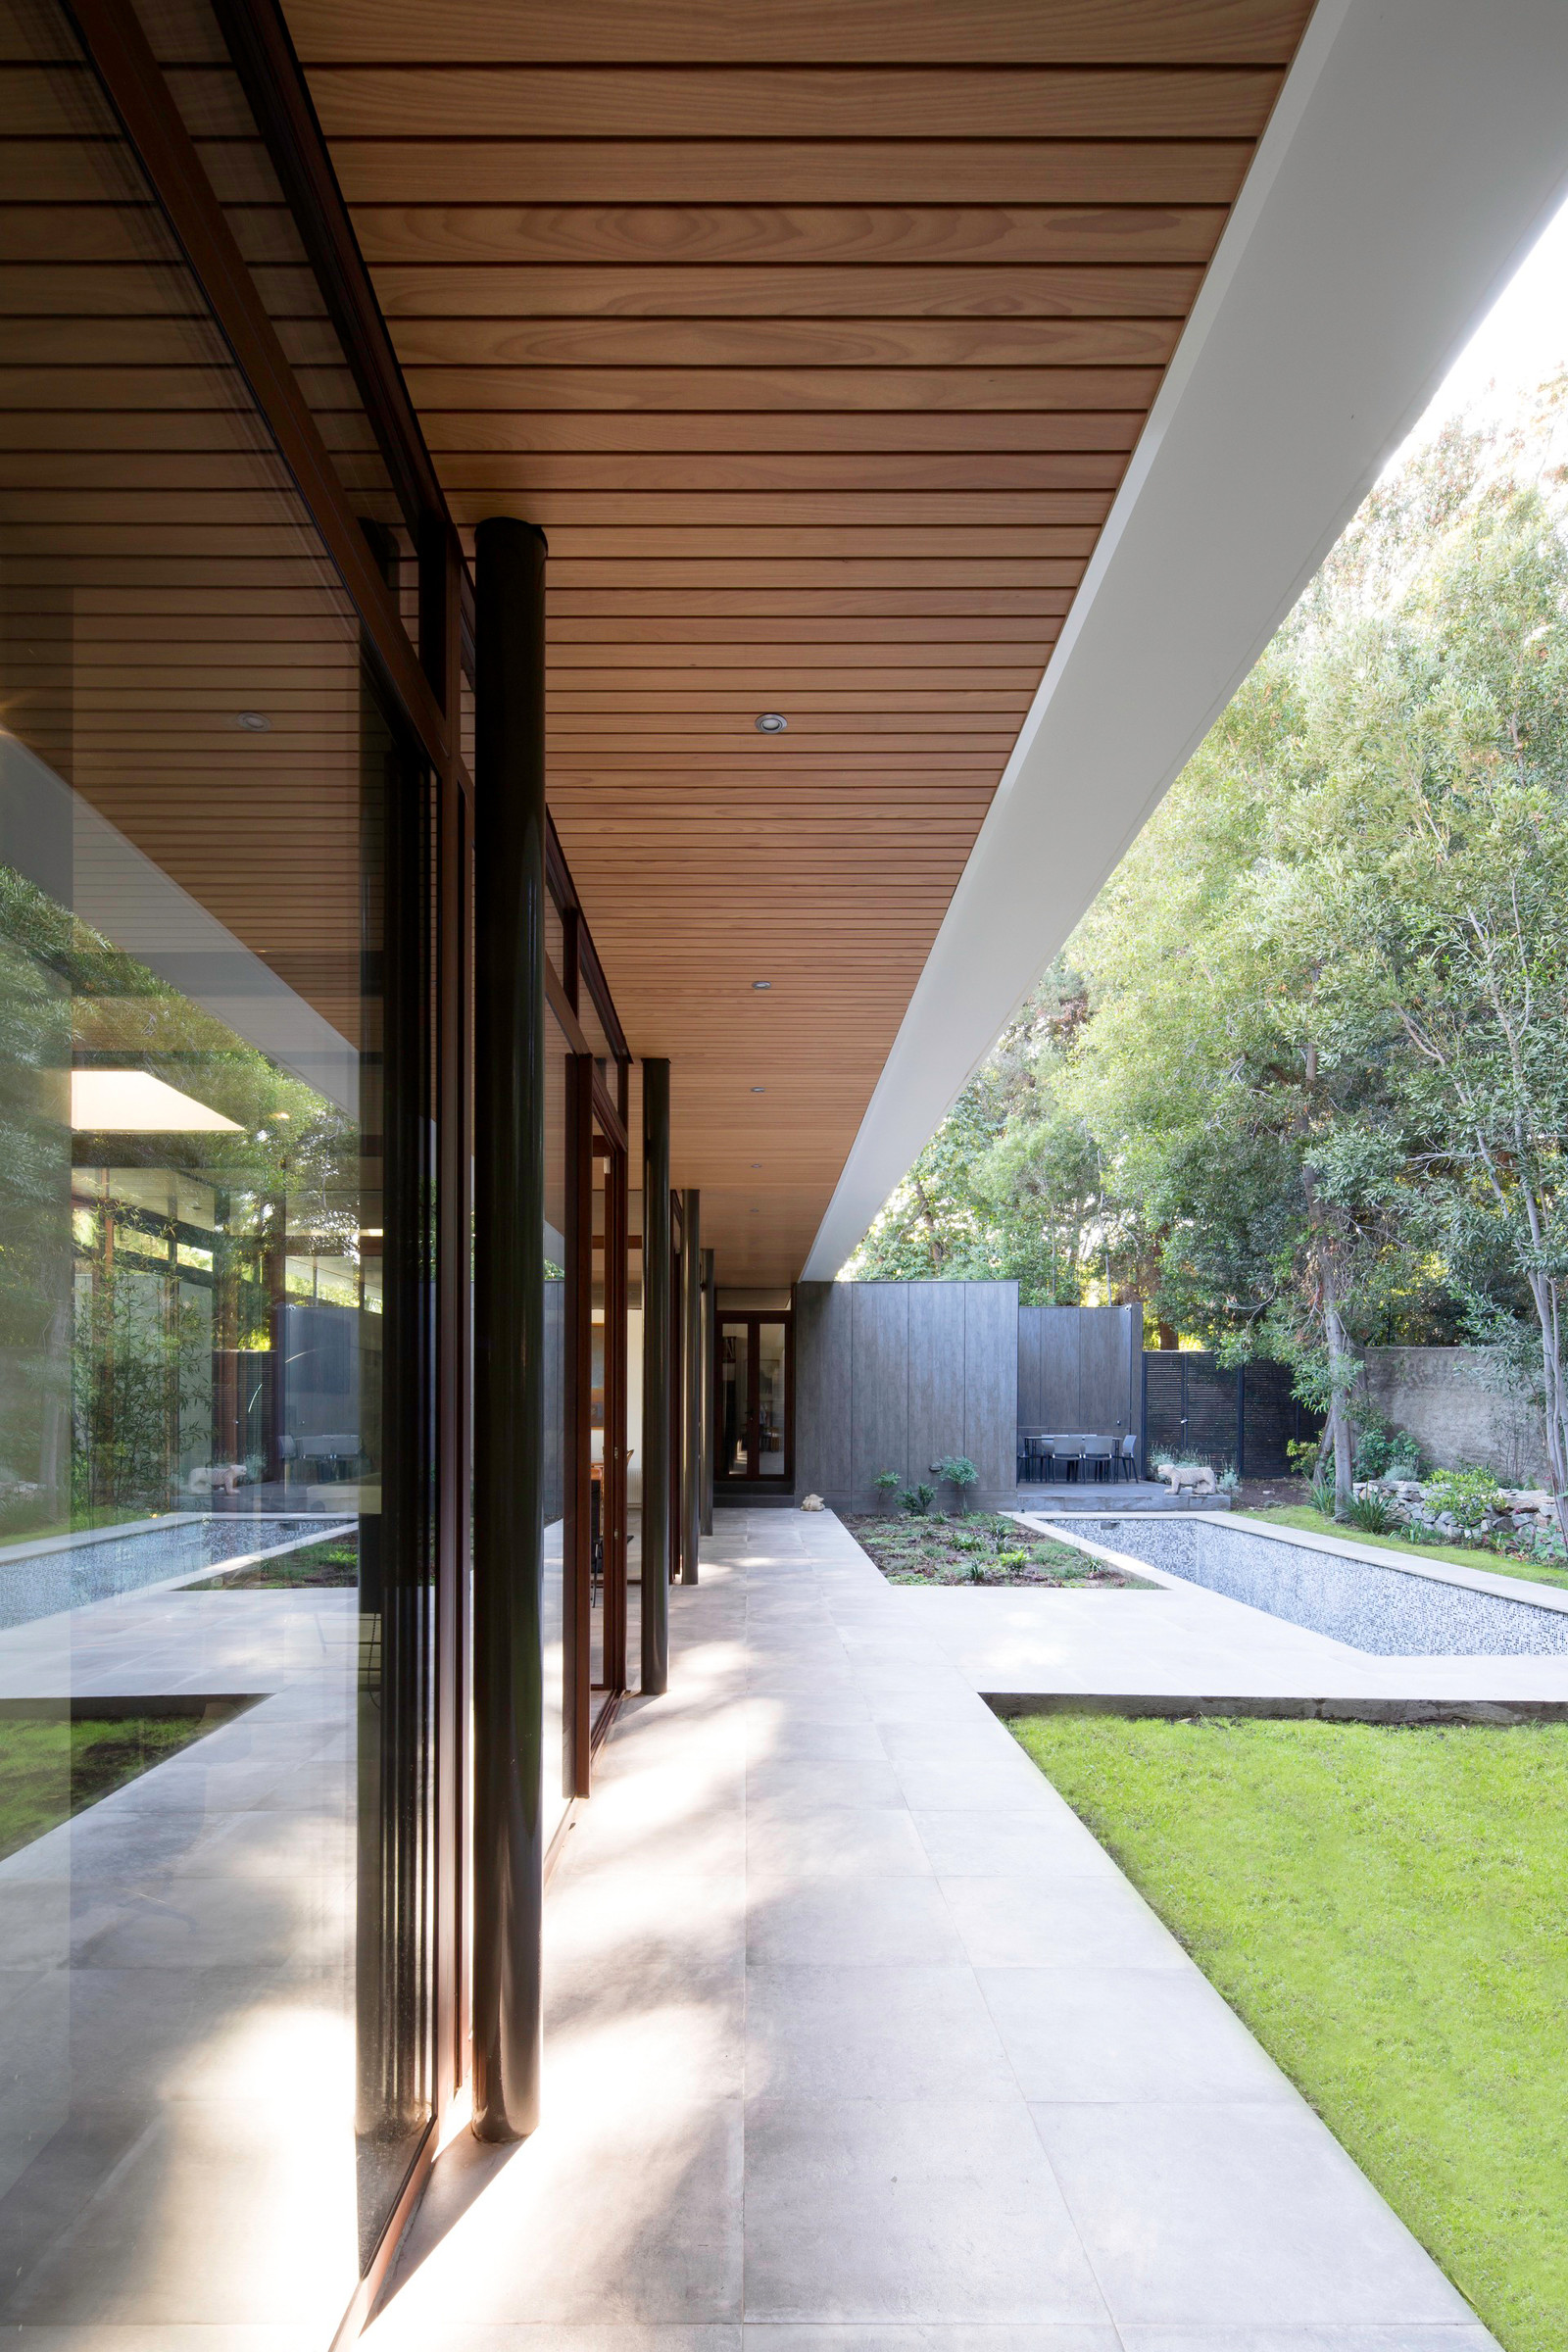 Glass walls and garden in Chile